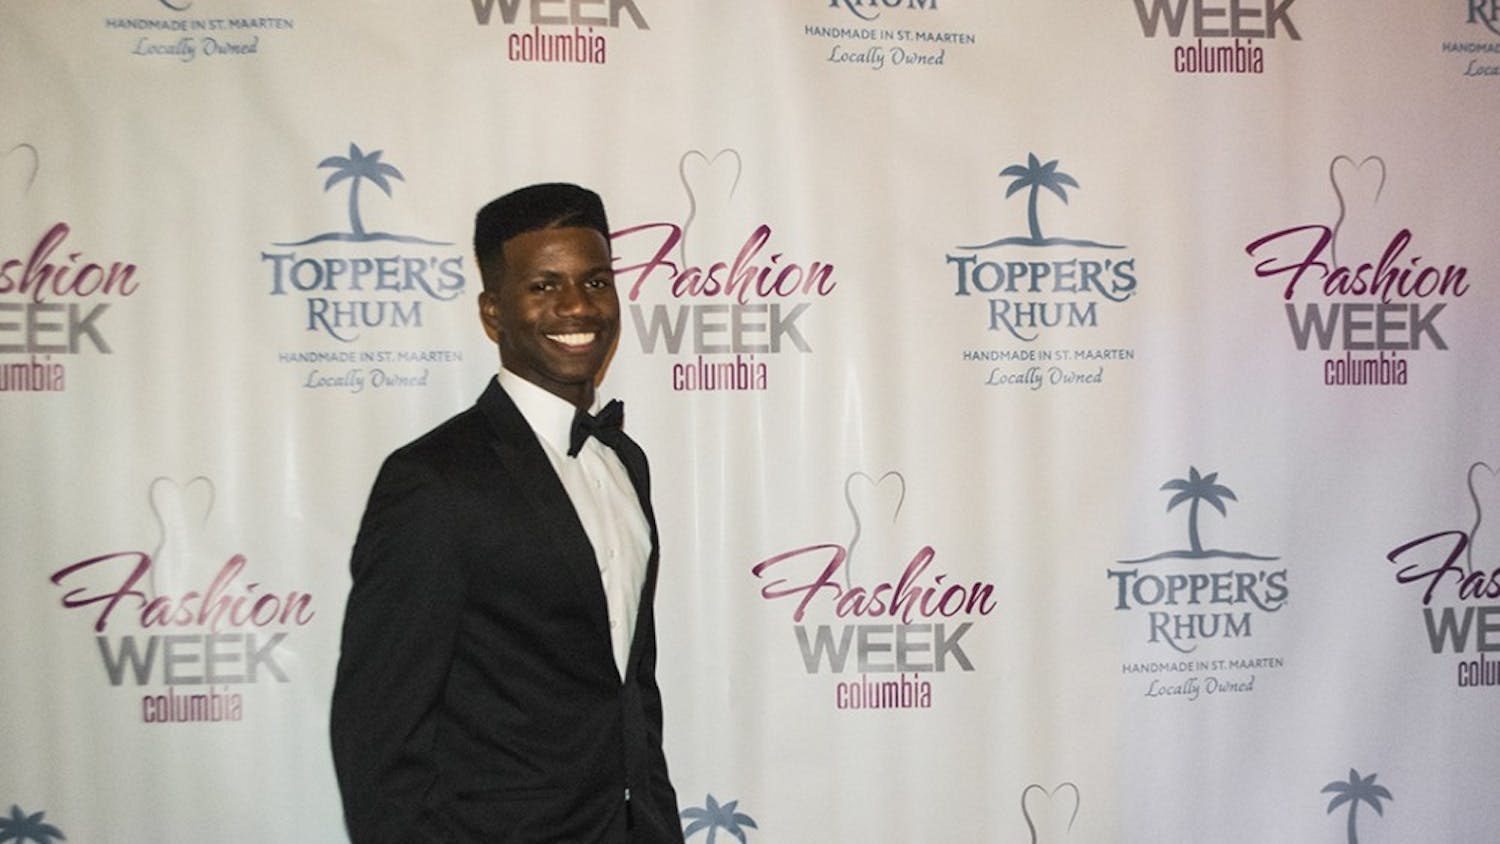 Fashion model and one of the 25 Most Stylish People in Columbia&nbsp;Lee Livingston models a tuxedo at Columbia Fashion Week's "Beautiful People Party."